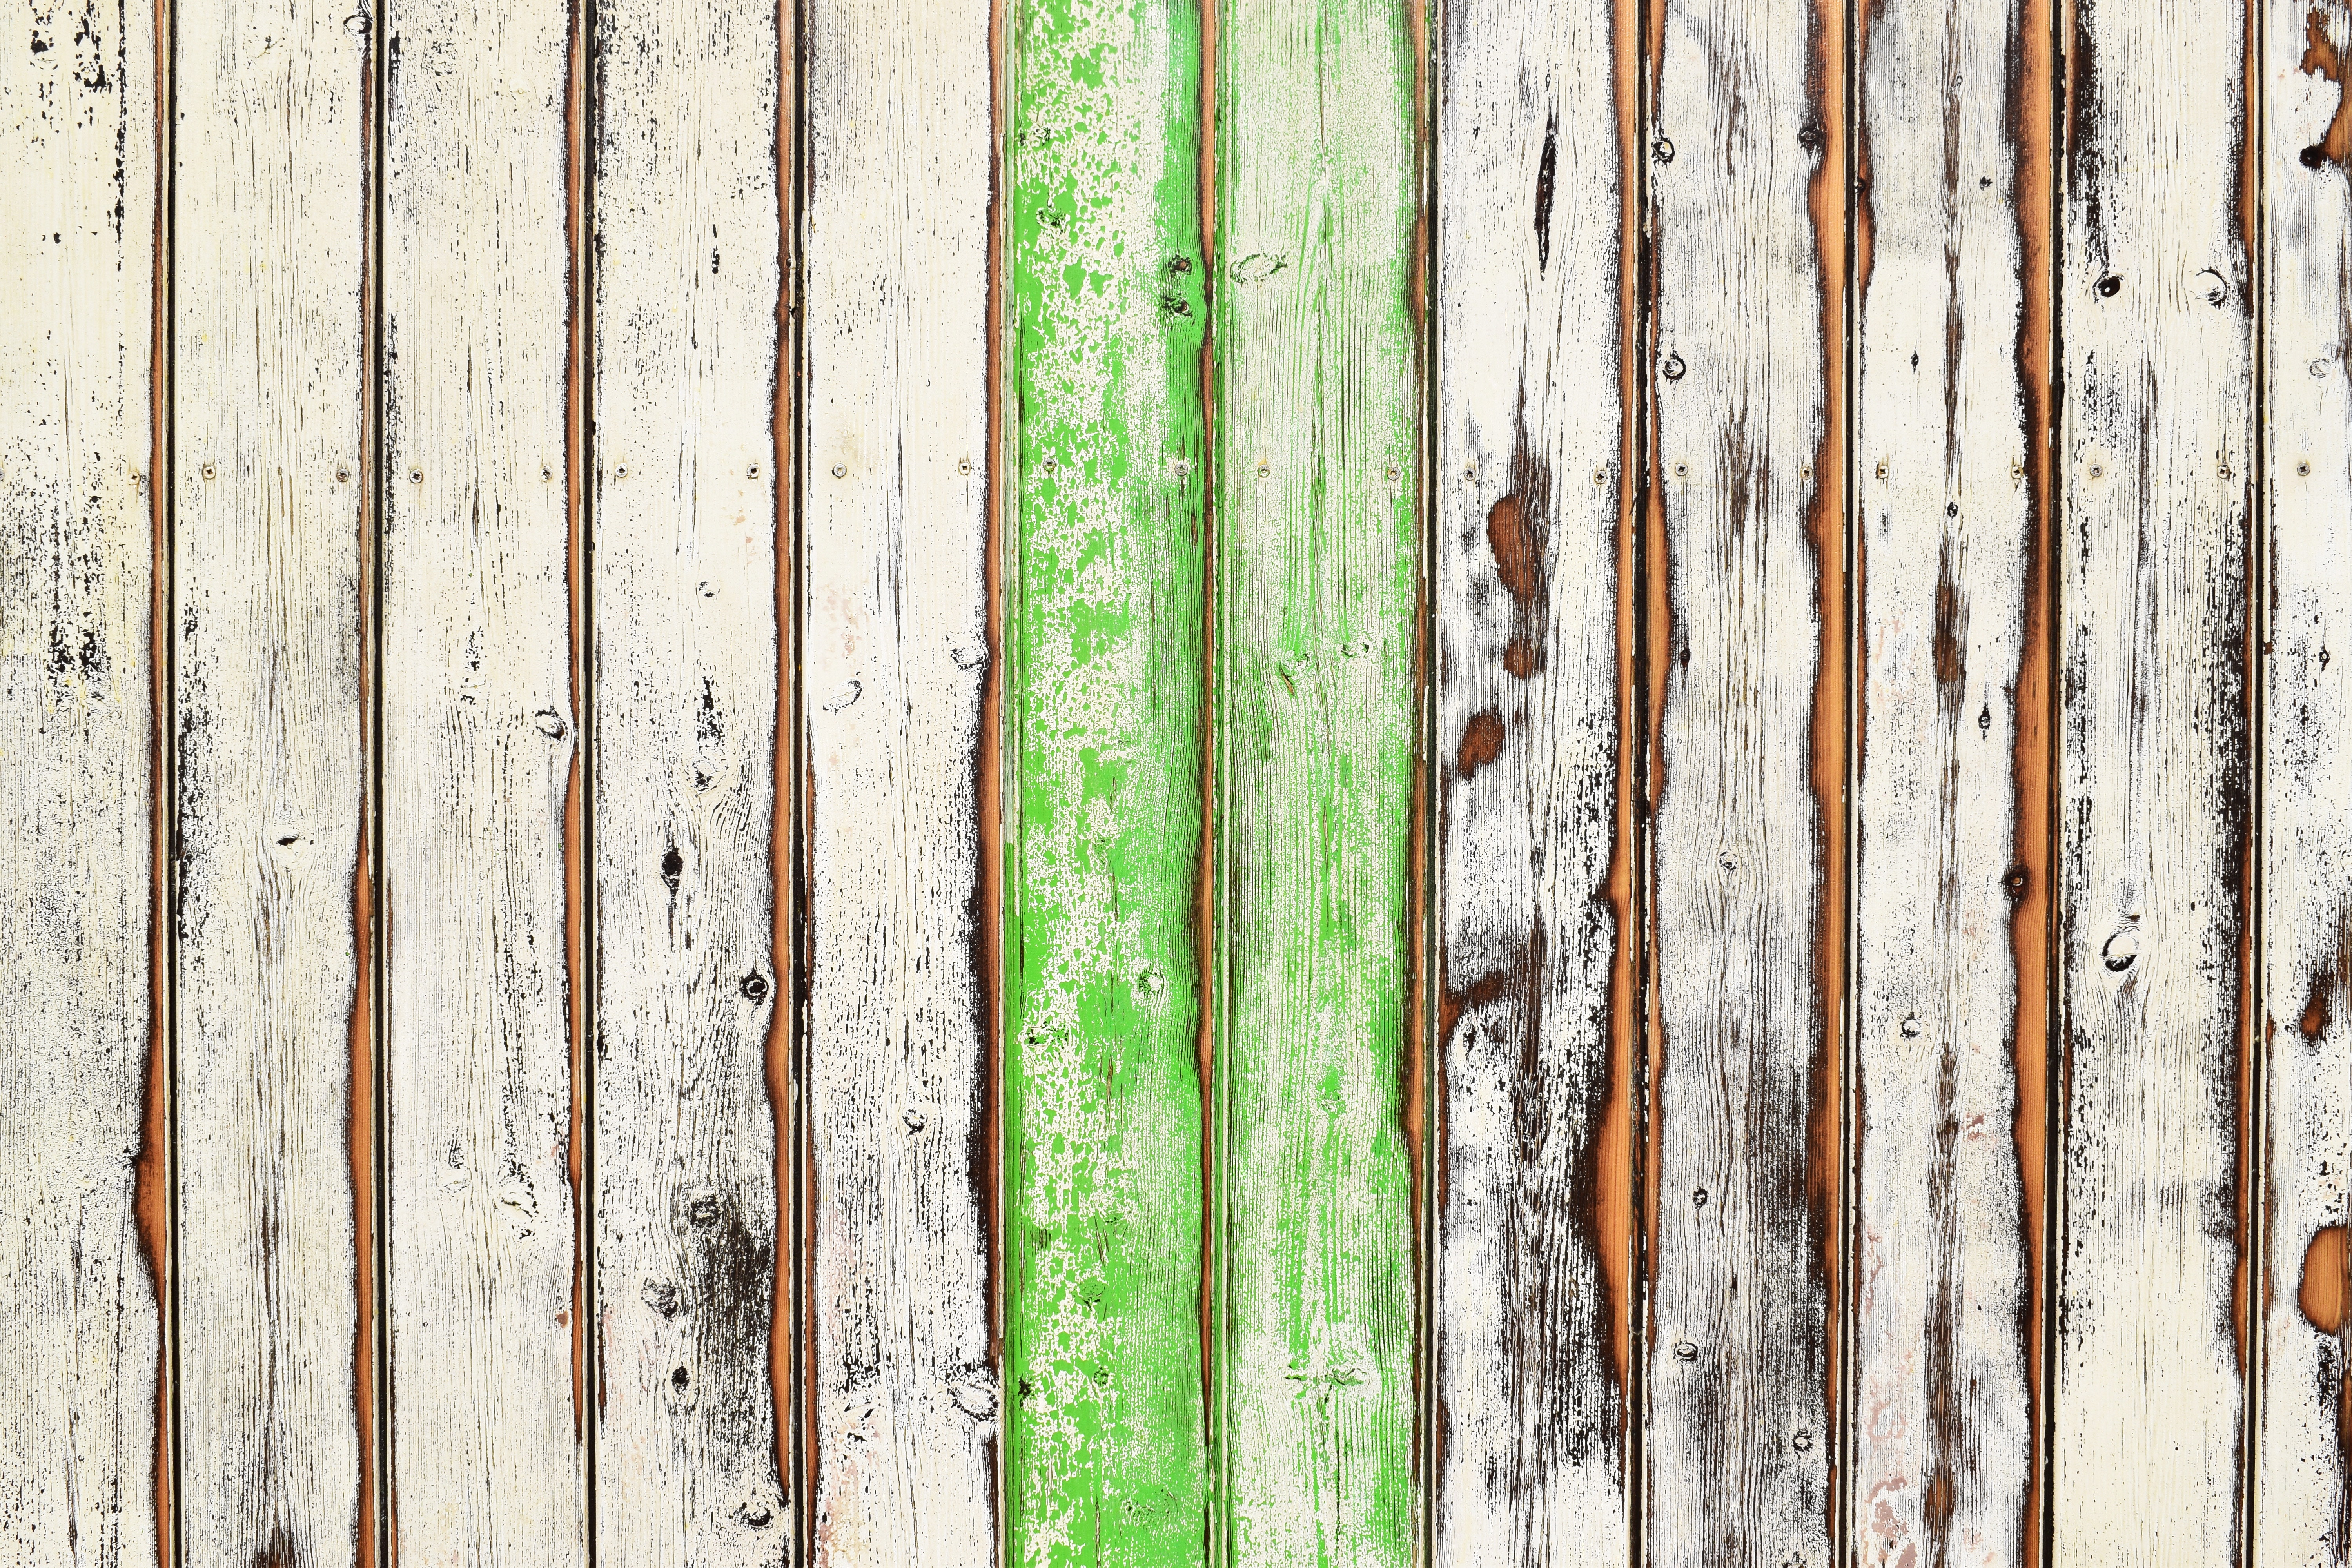 wood, wooden, texture, textures, paint, shabby